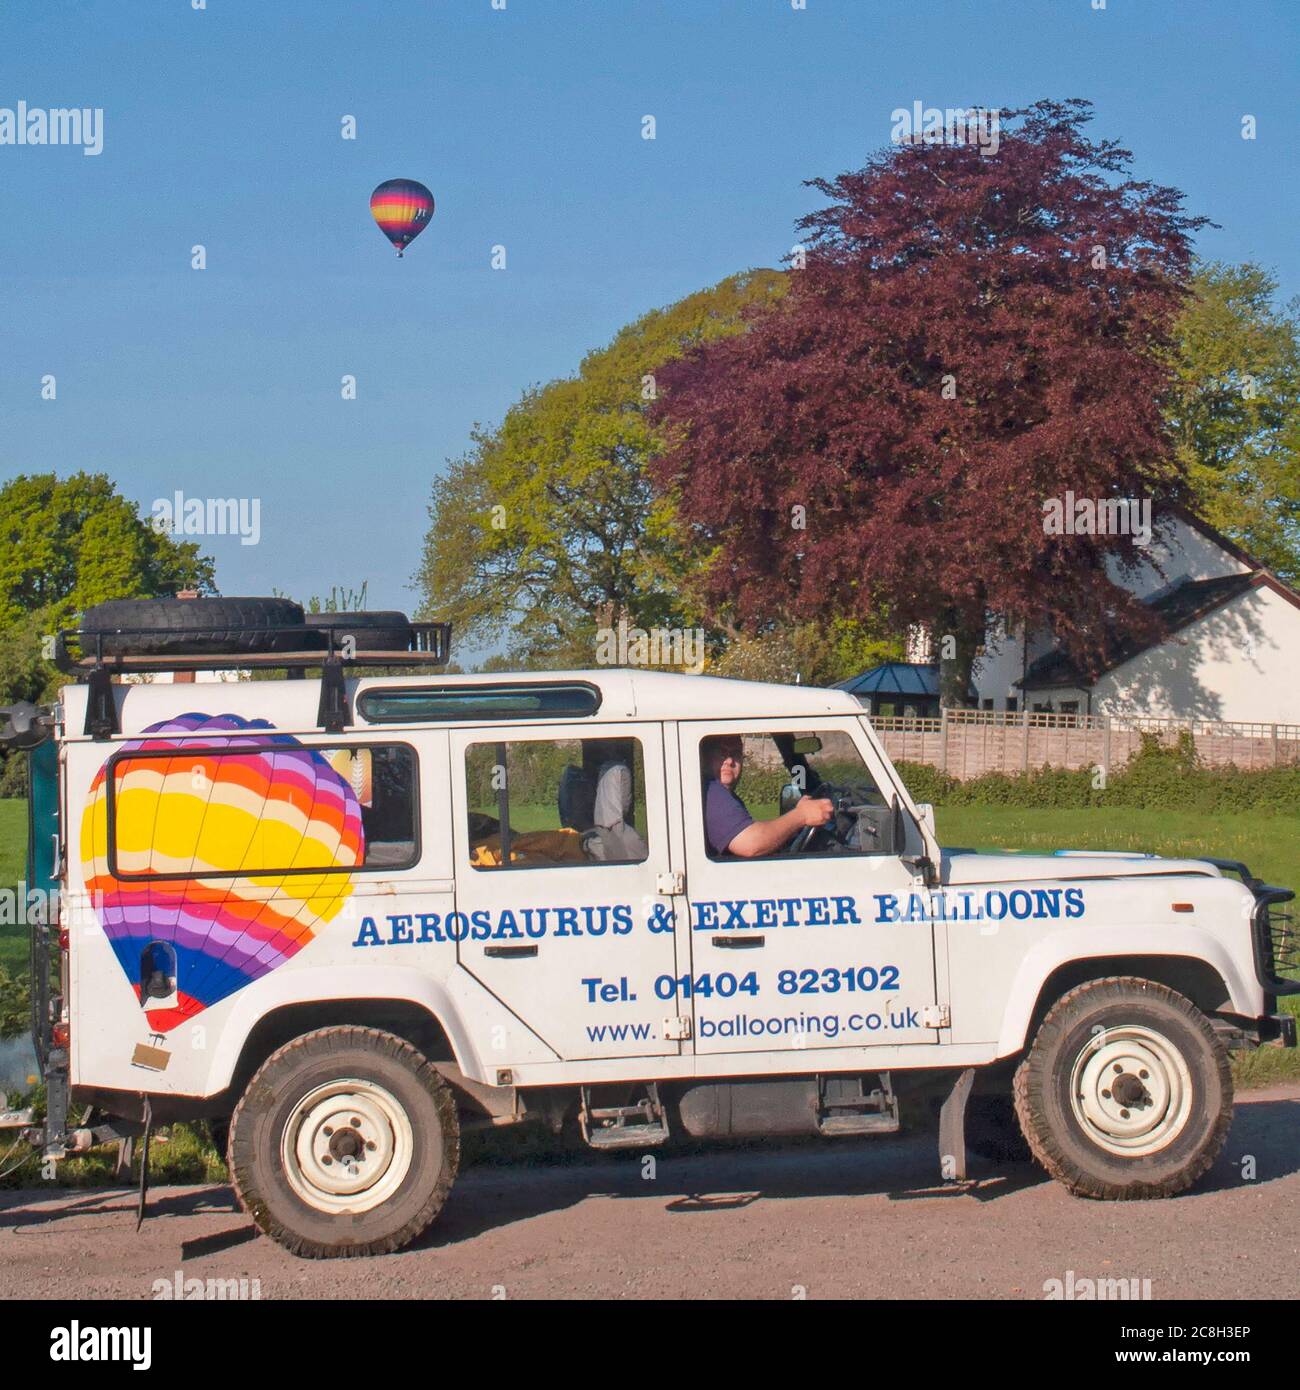 Hot air ballooning business company monitoring flight of a colourful balloon from Land Rover defender vehicle in country lane in Somerset England UK Stock Photo